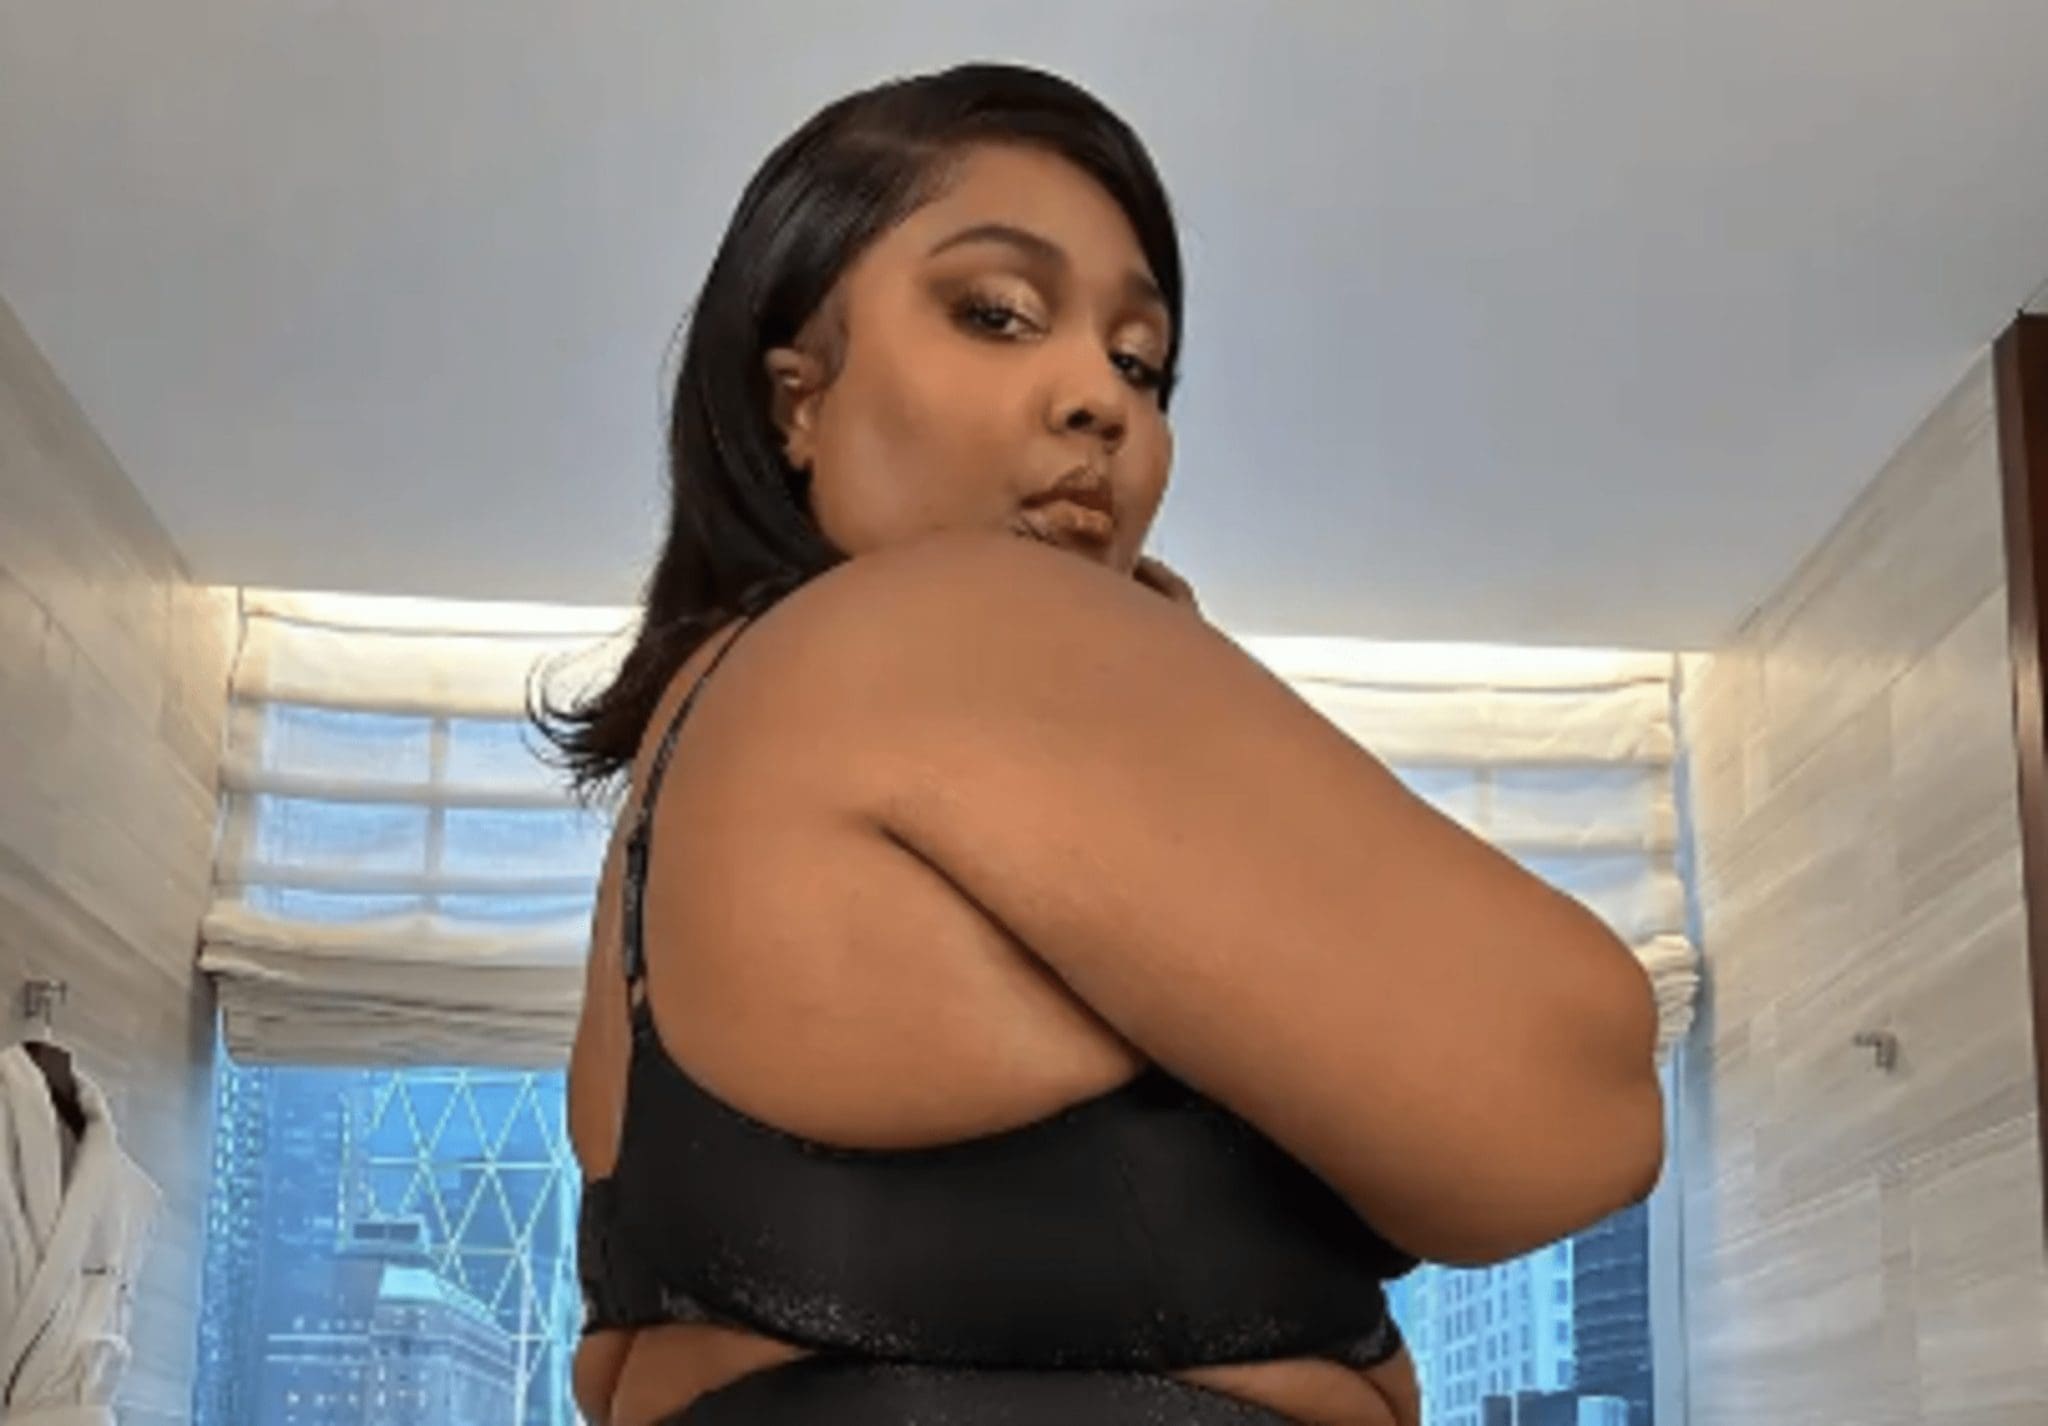 A Slimmer Lizzo, According To Kanye West, Has "Bots" Attacking Her Because Of Her New Figure